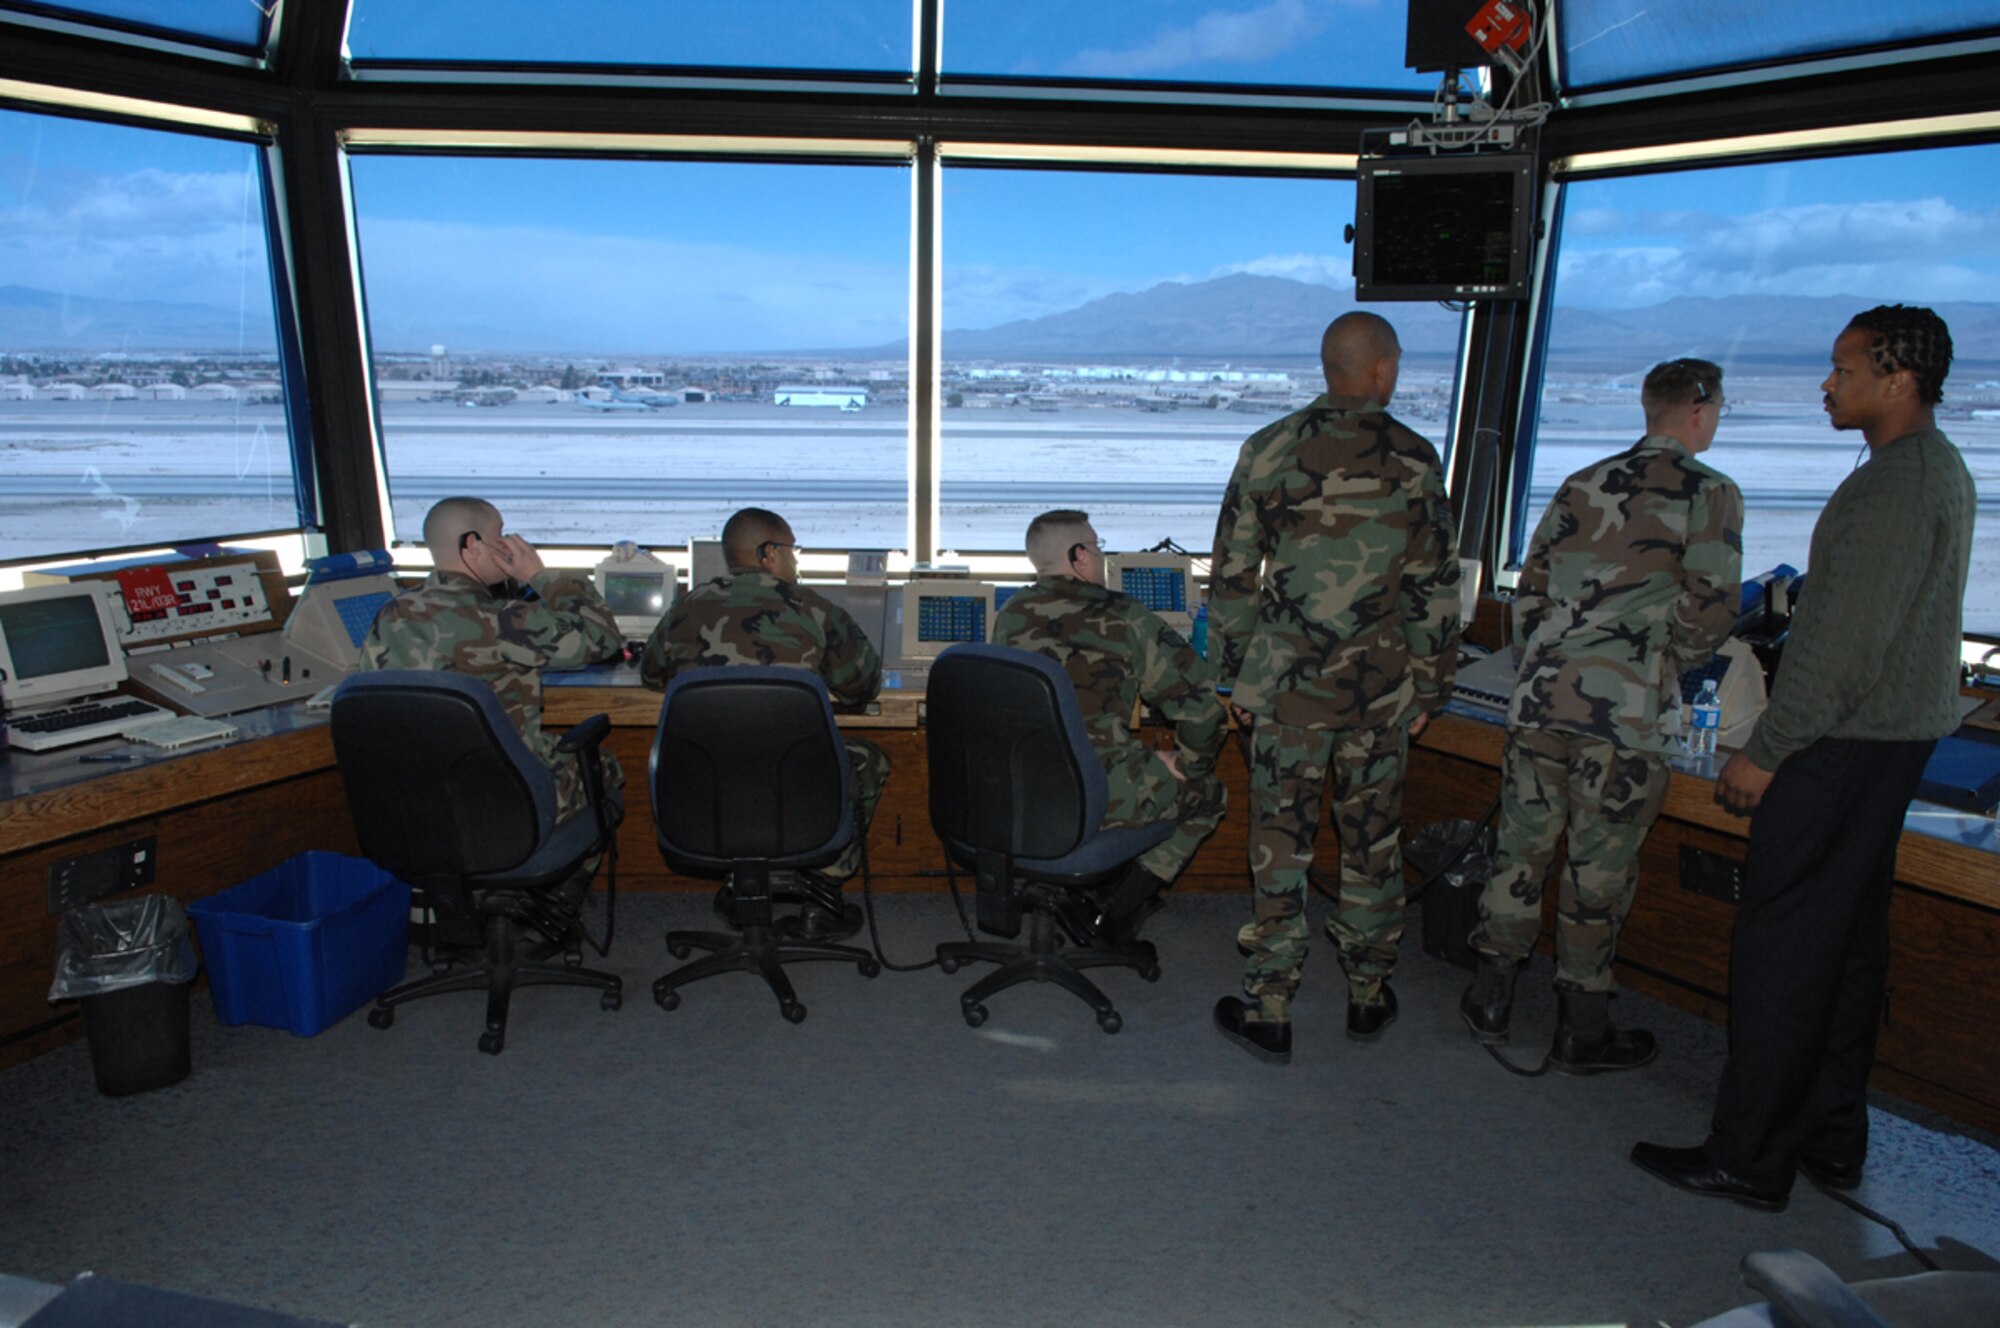 The Nellis Control Tower is one of the top five busiest towers in the Air Force.  From left to right, the positions are manned by Airman Ryan Bukauskas, Staff Sgt. Greylynn Carr, Staff Sgt. Heath Dickes, Senior Airman Lynn Jackson, Airman 1st Class Scott Apple and Aaron Headen. (U.S. Air Force photo/Airman 1st Class Kasabyan McGarvey)